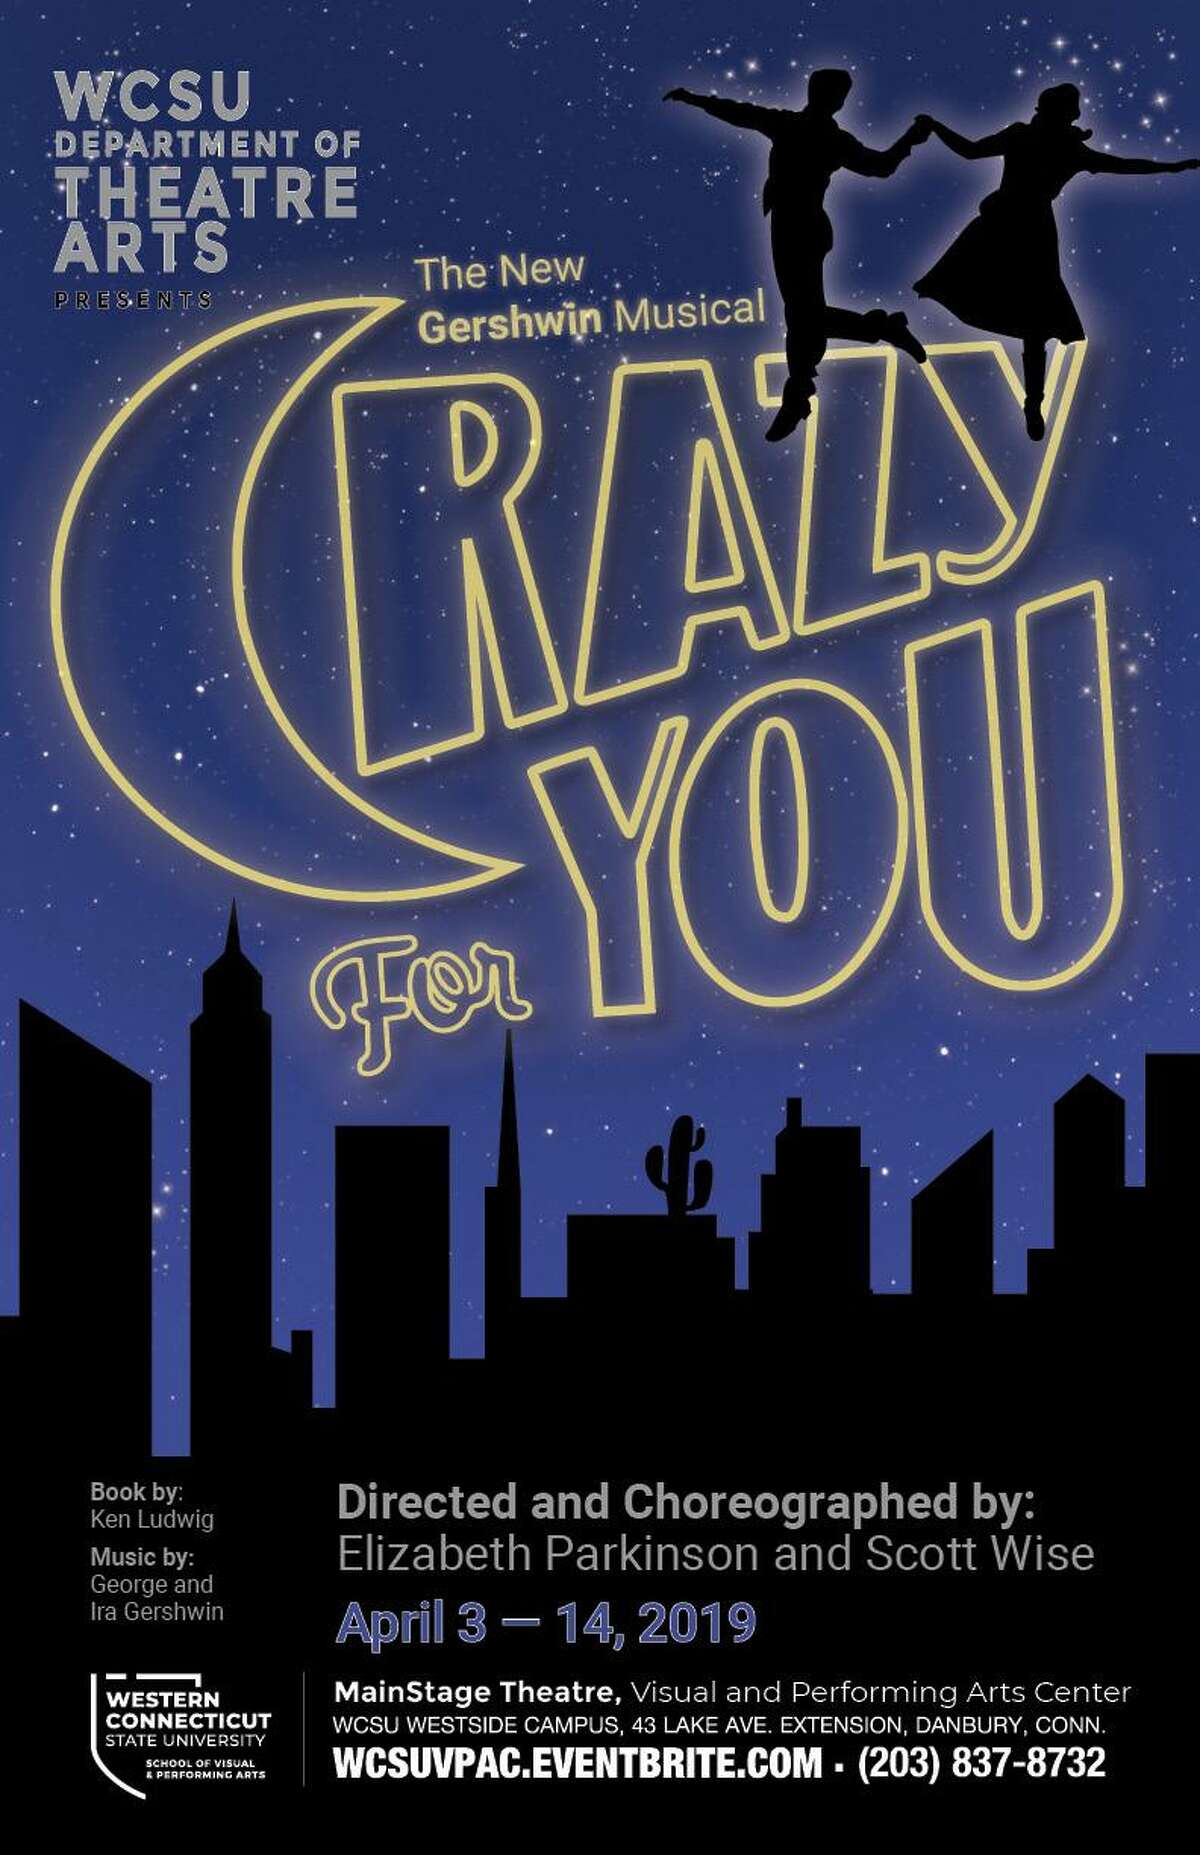 “Crazy for You” runs April 4-April14 in the MainStage Theatre of the Visual and Performing Arts Center on Western Connecticut State University’s Westside campus in Danbury.